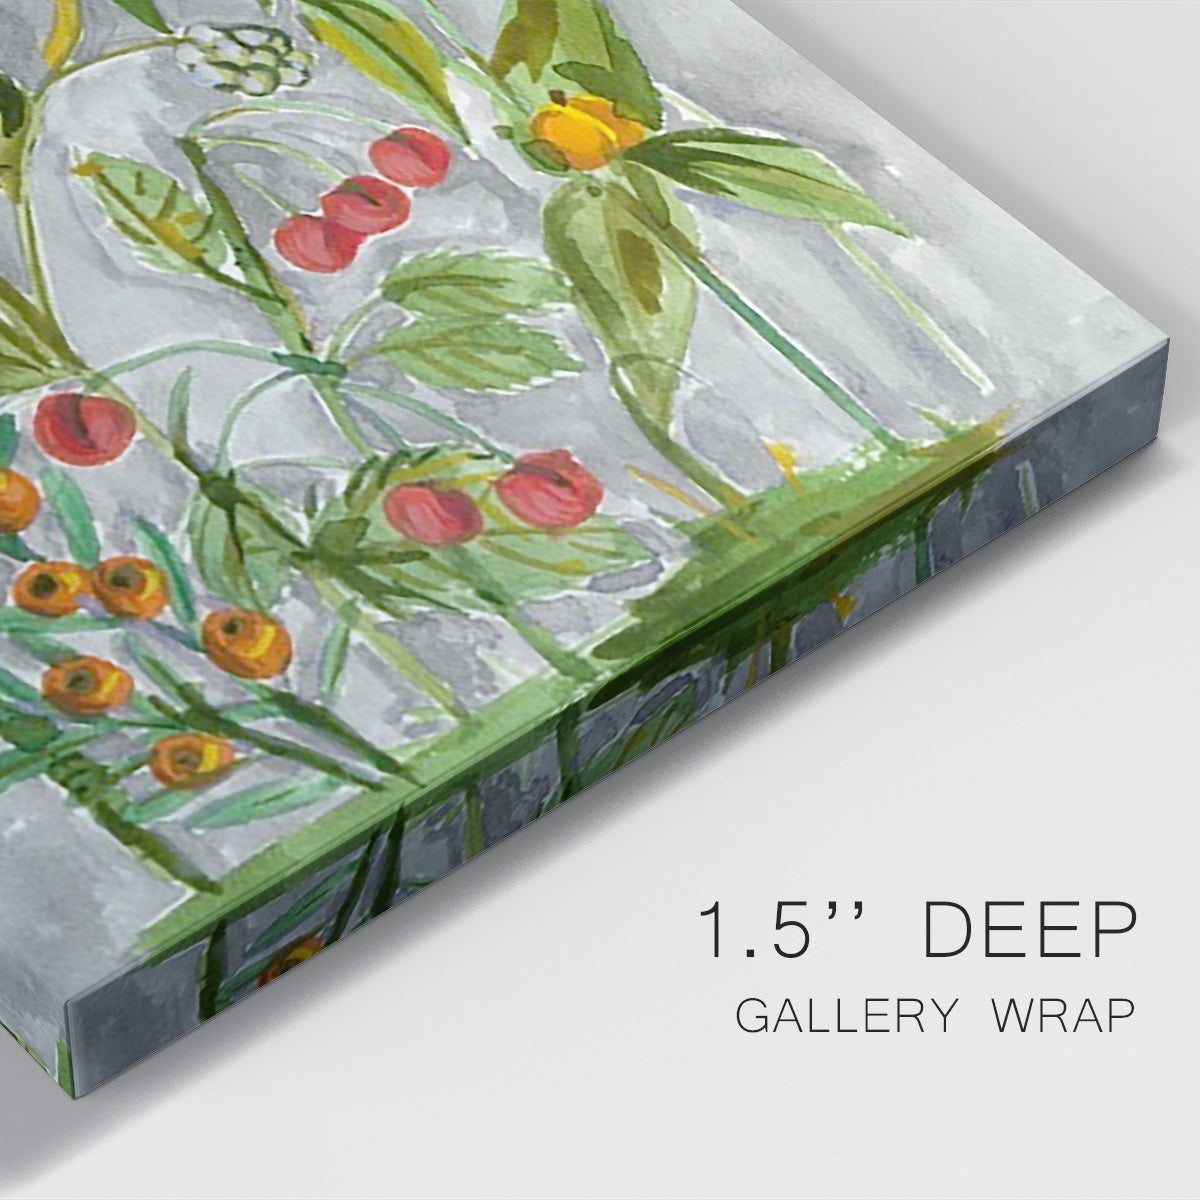 Dear Nature II Premium Gallery Wrapped Canvas - Ready to Hang